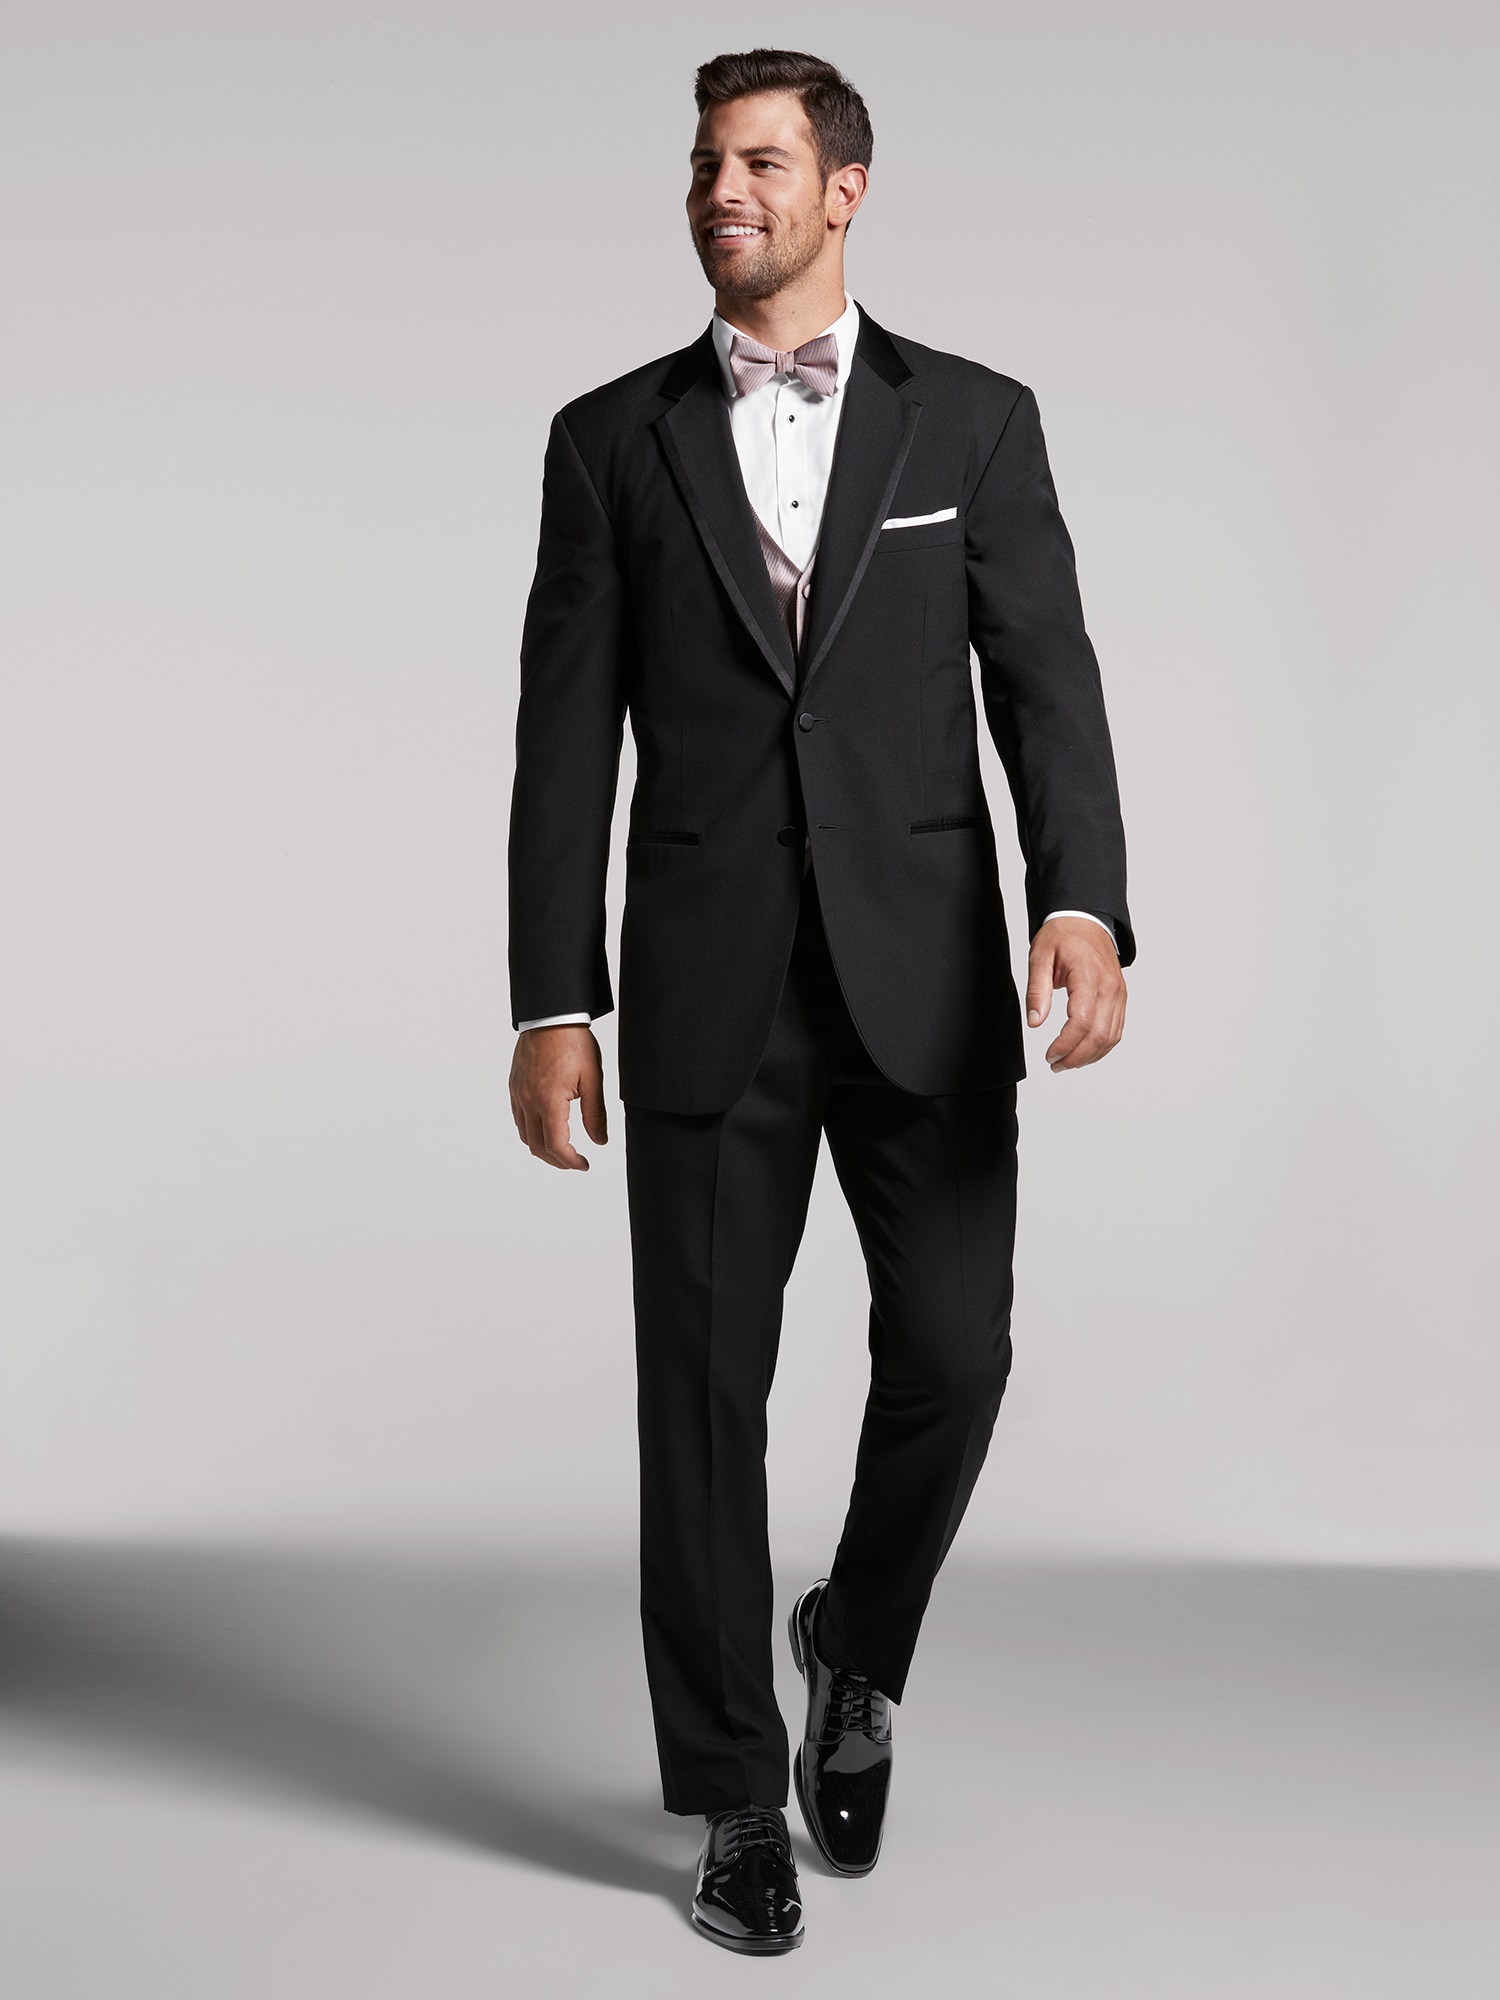 Tuxedo Styles For Special Occasions & Formal Events | Men'S Wearhouse